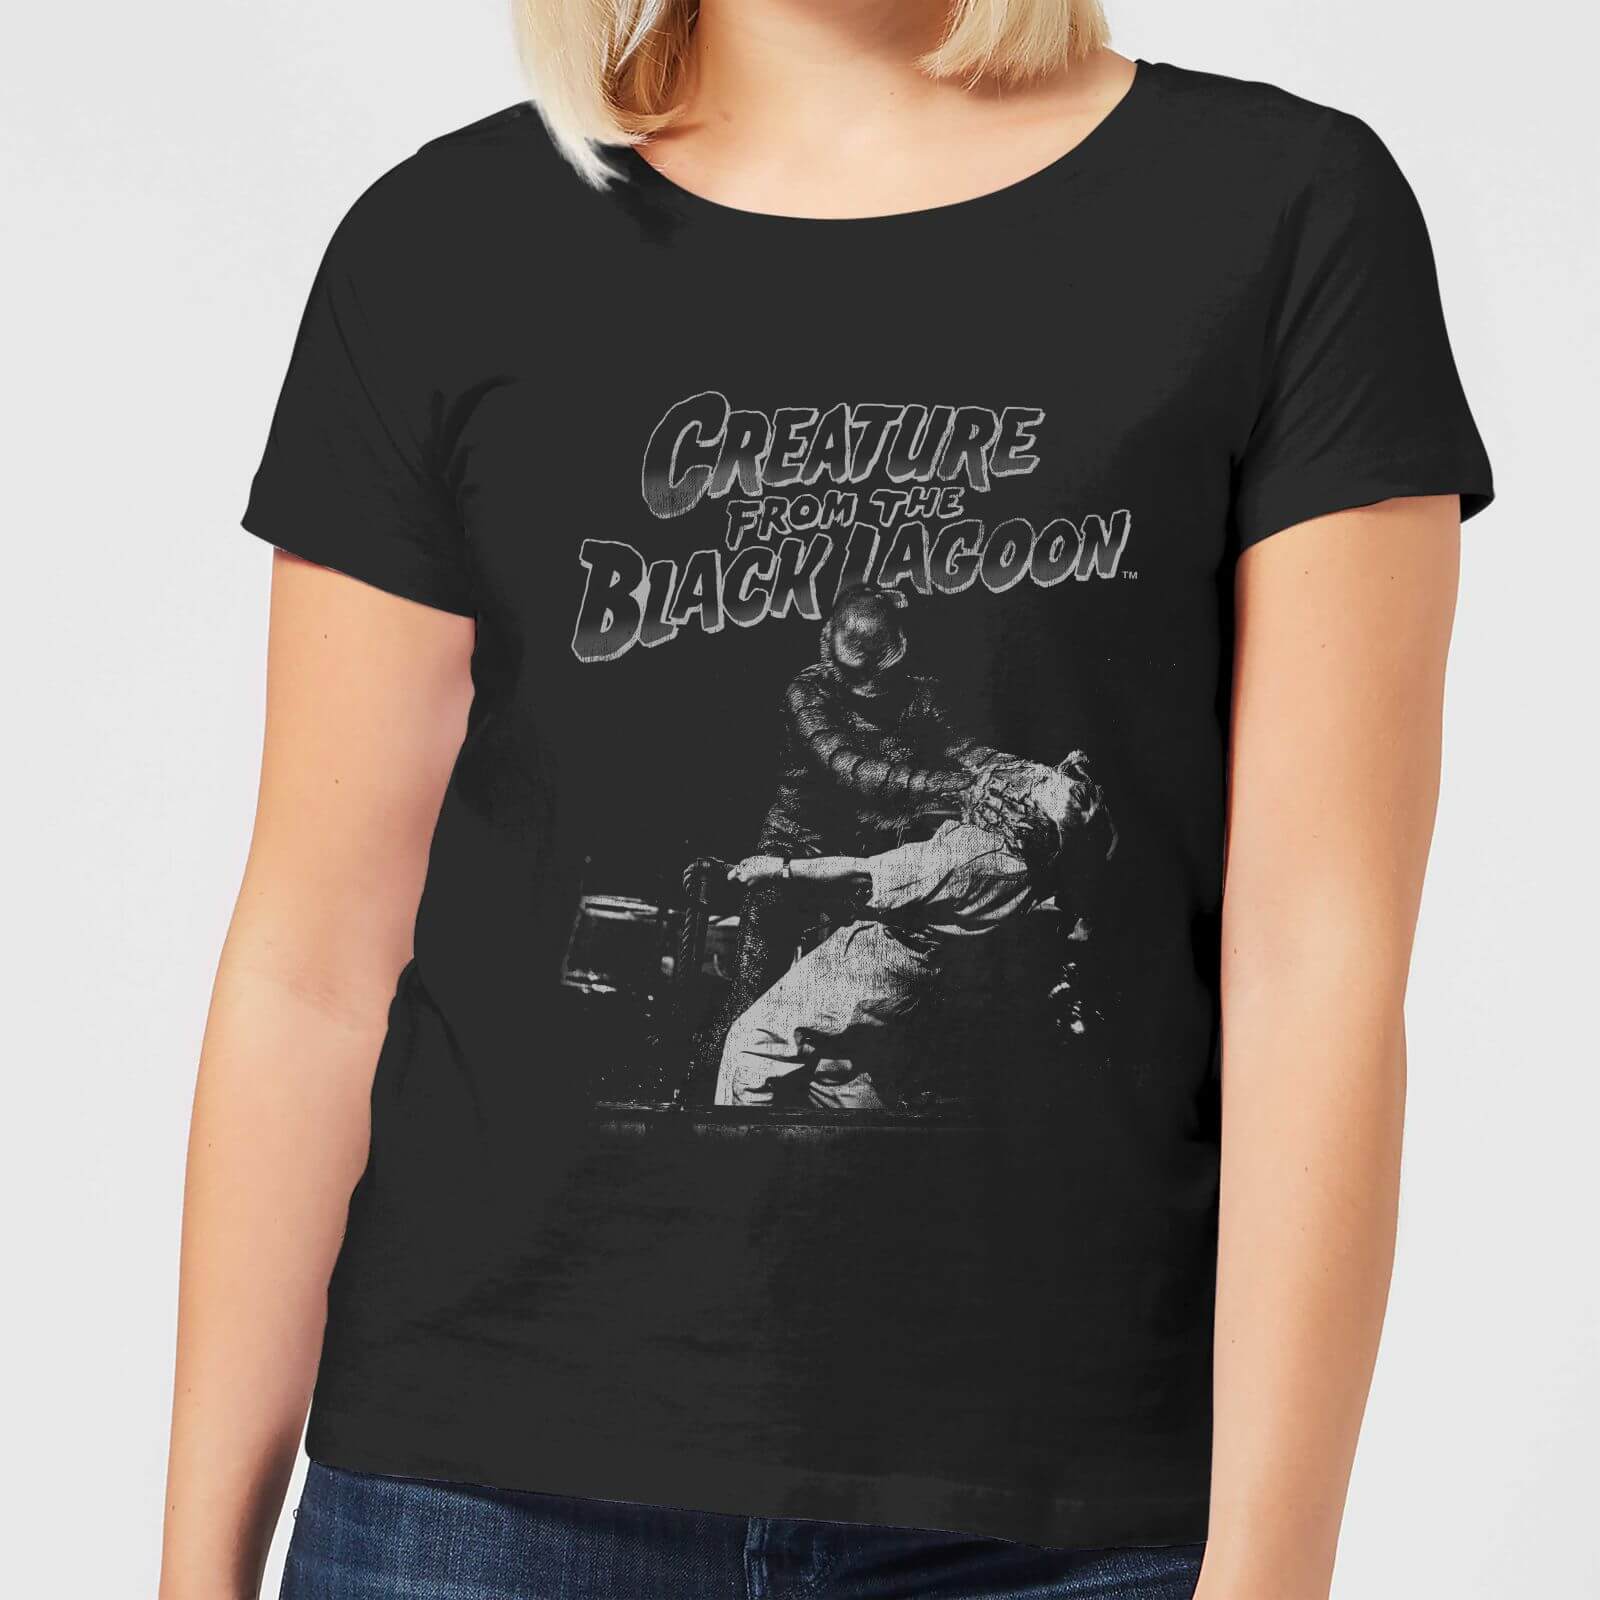 Universal Monsters Creature From The Black Lagoon Black and White Women's T-Shirt - Black - 4XL - Black